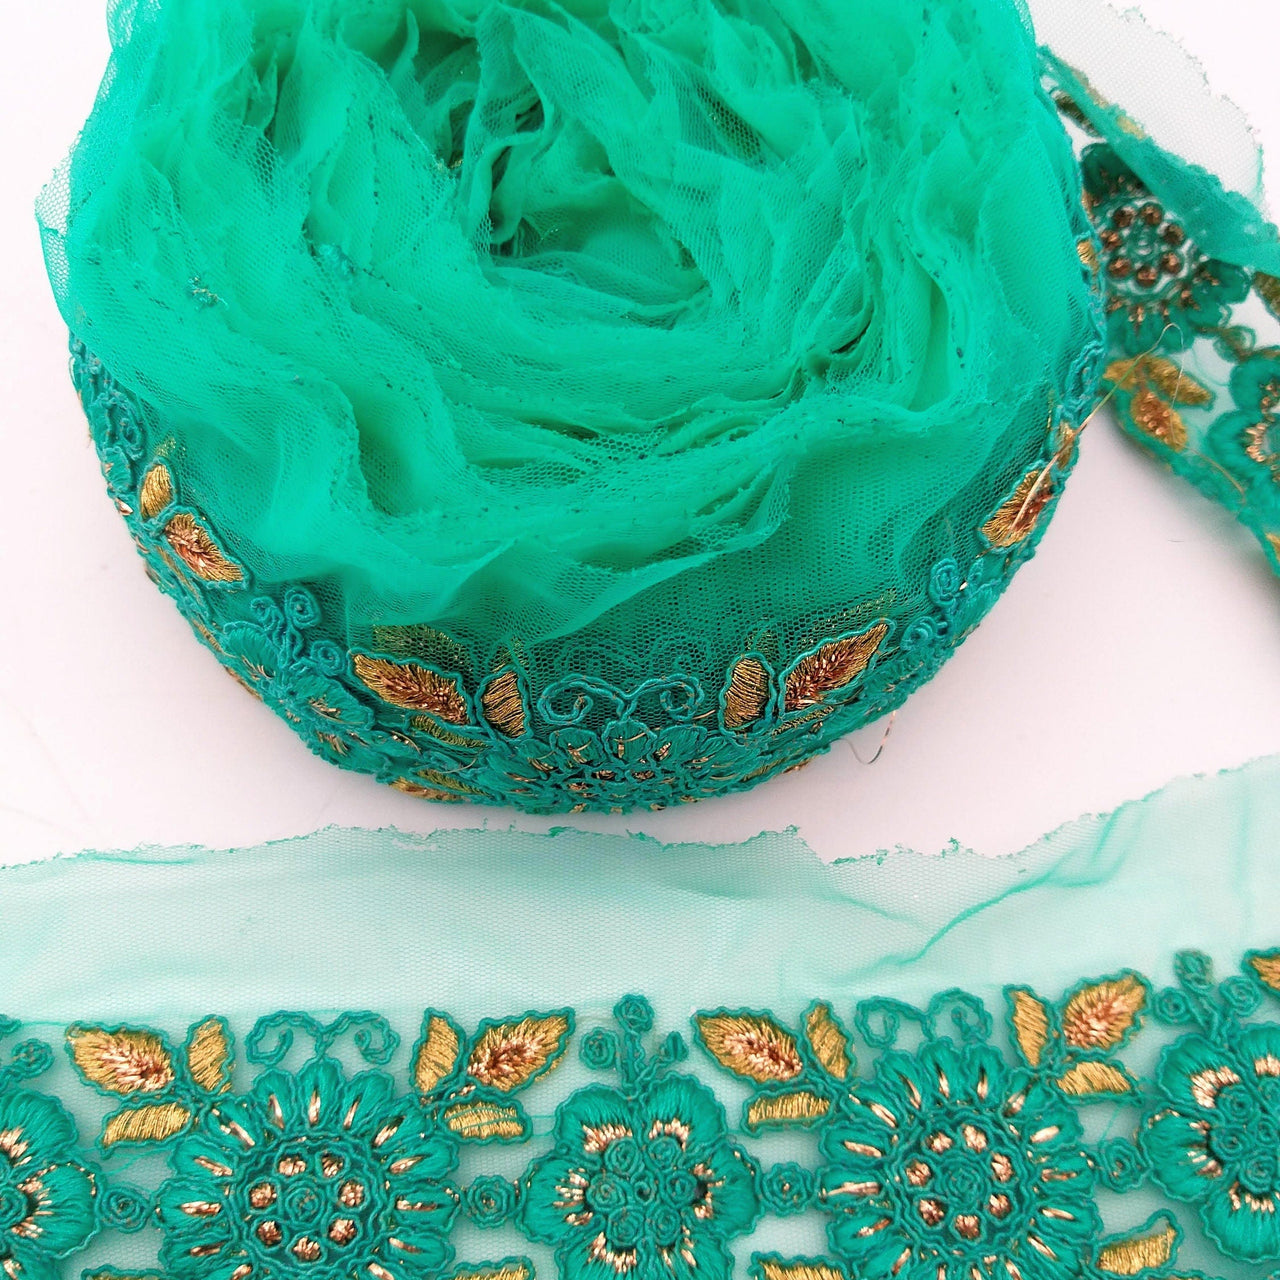 Cyan Green Net Fabric Lace Trim with Floral Embroidery, Lace Trim, Sari Border